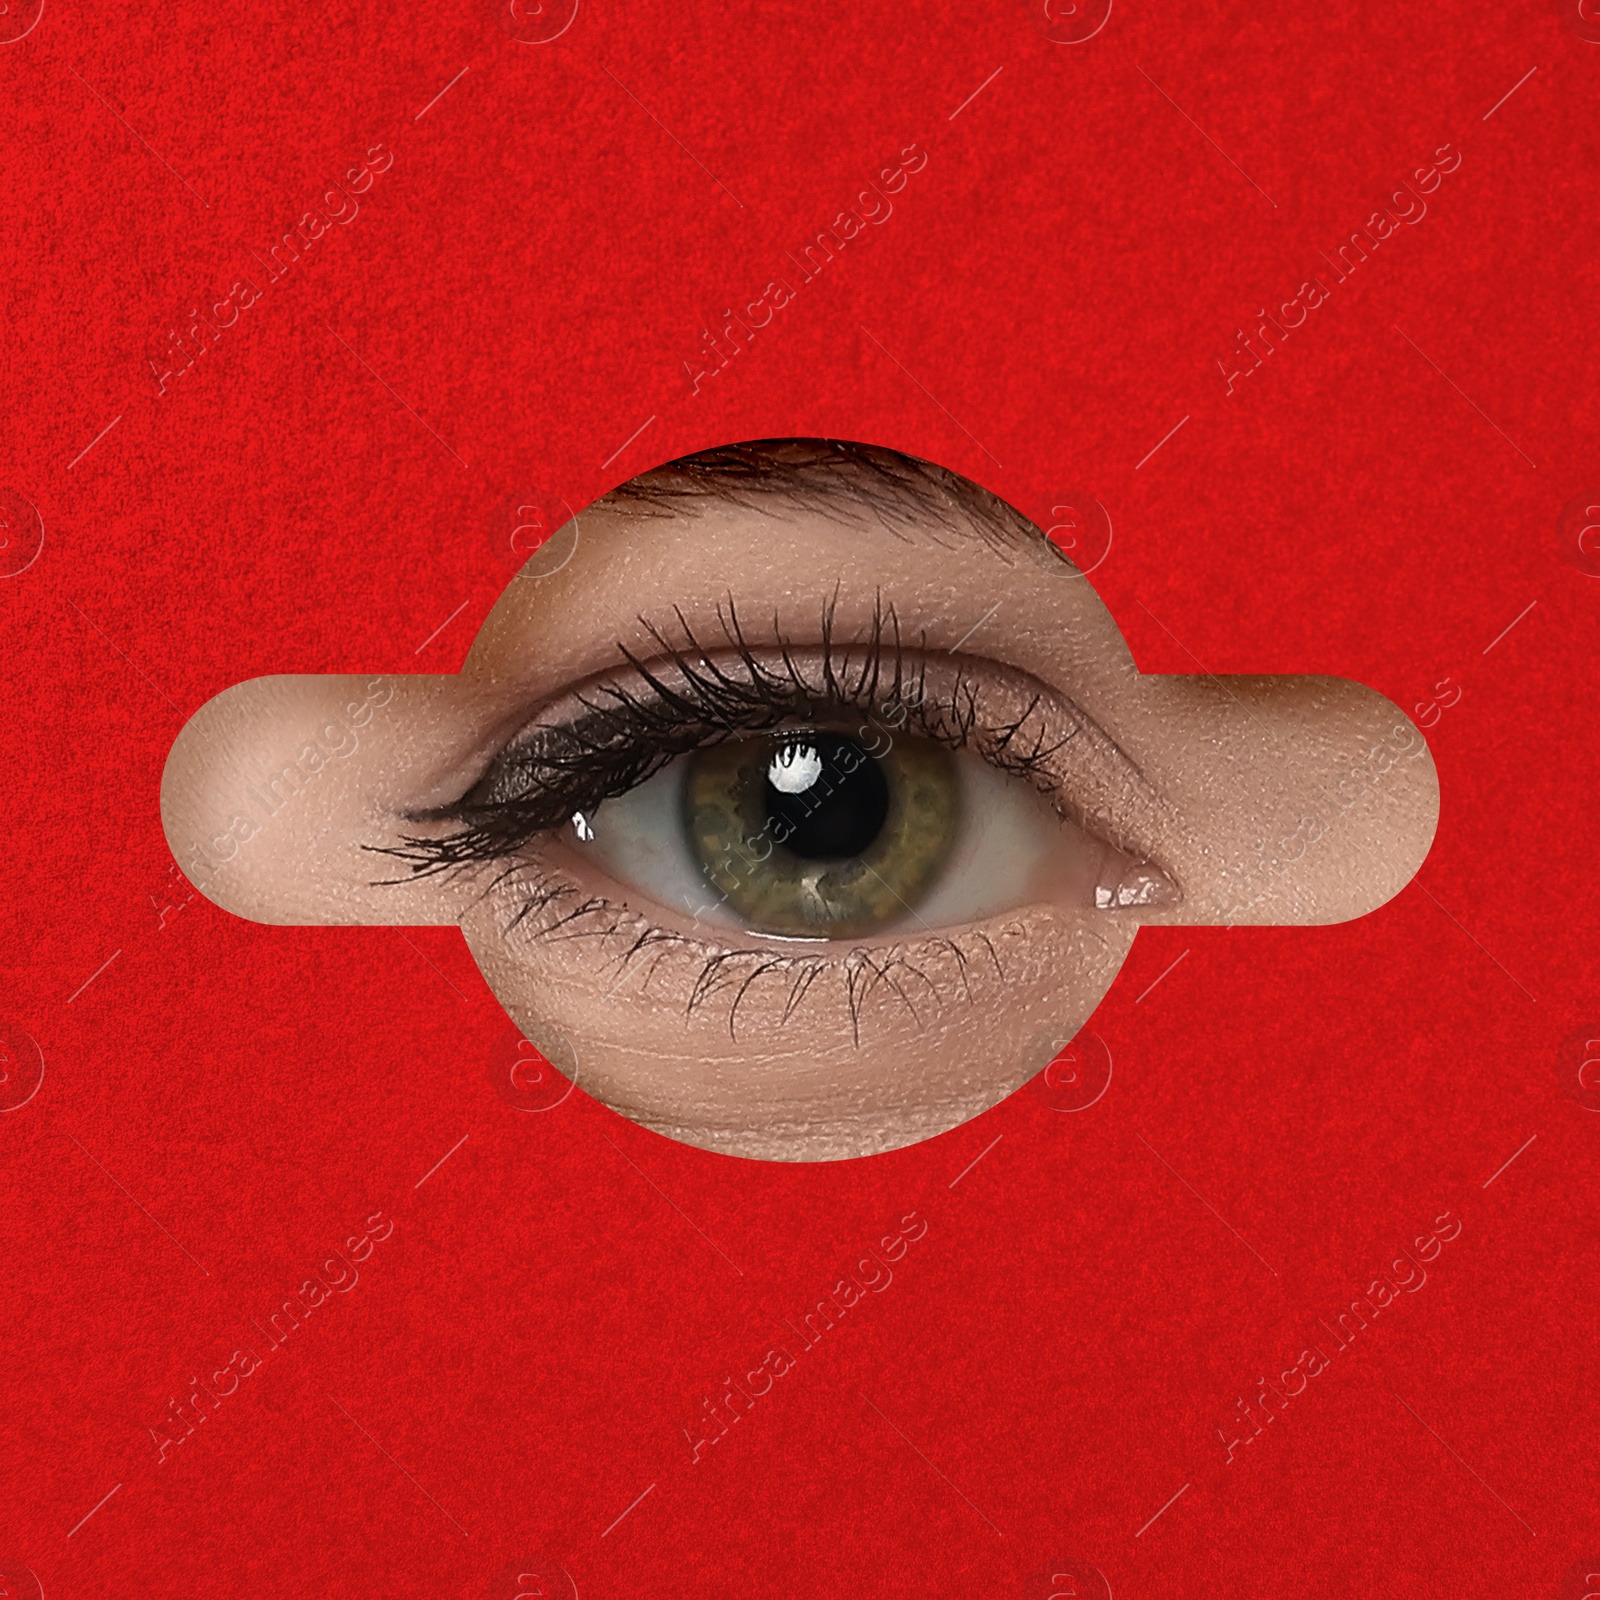 Image of Woman looking through keyhole in red surface